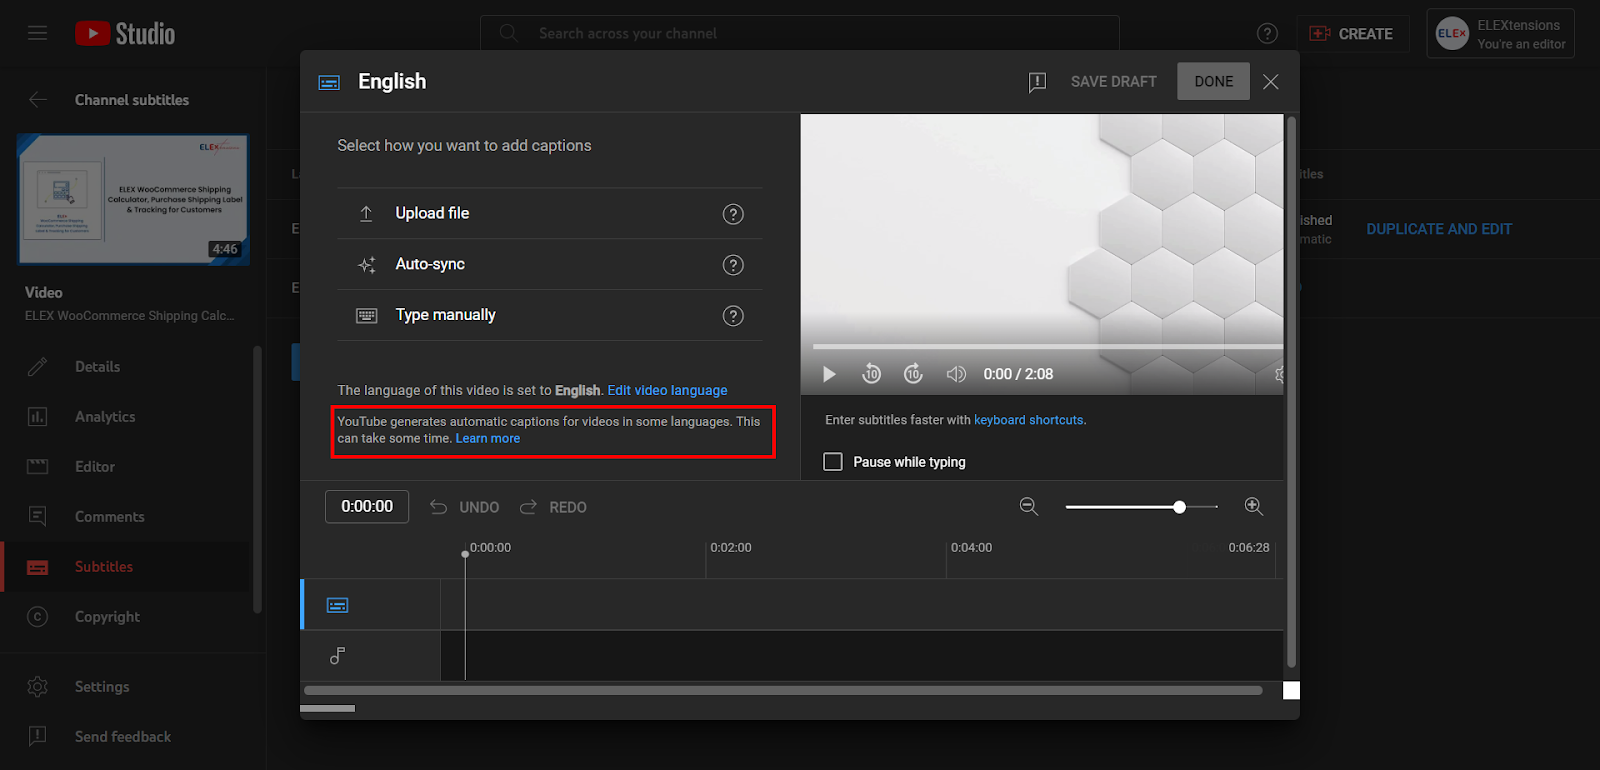 Automatic captions are enable by default